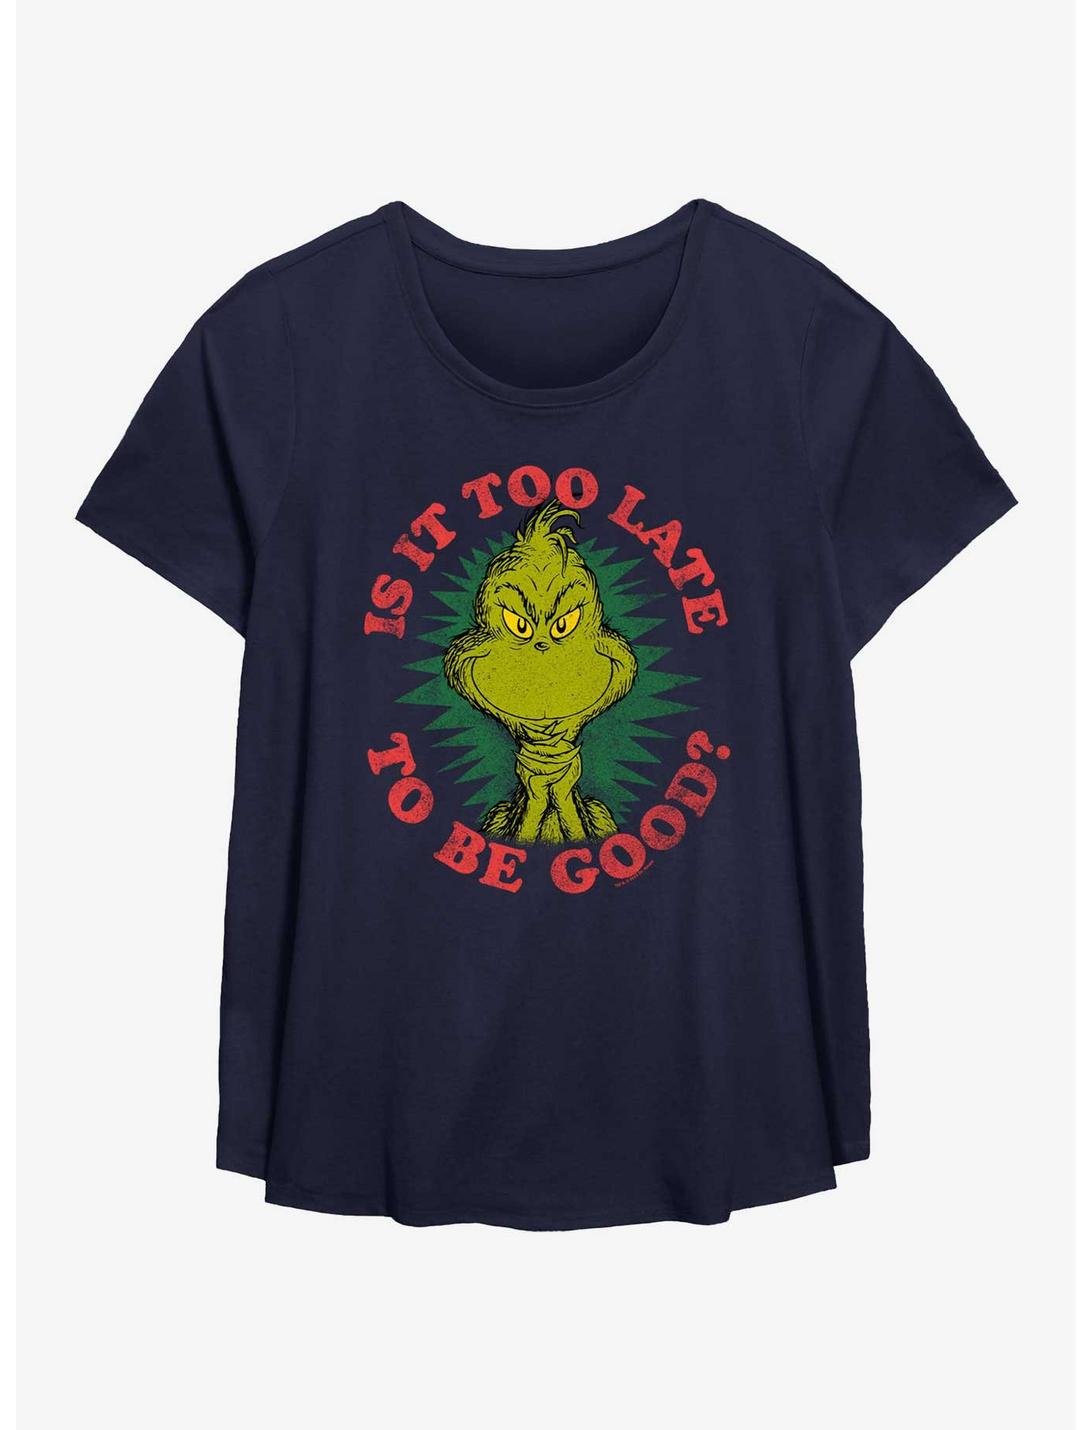 Dr. Seuss How The Grinch Stole Christmas Too Late To Be Good Womens T-Shirt Plus Size, NAVY, hi-res